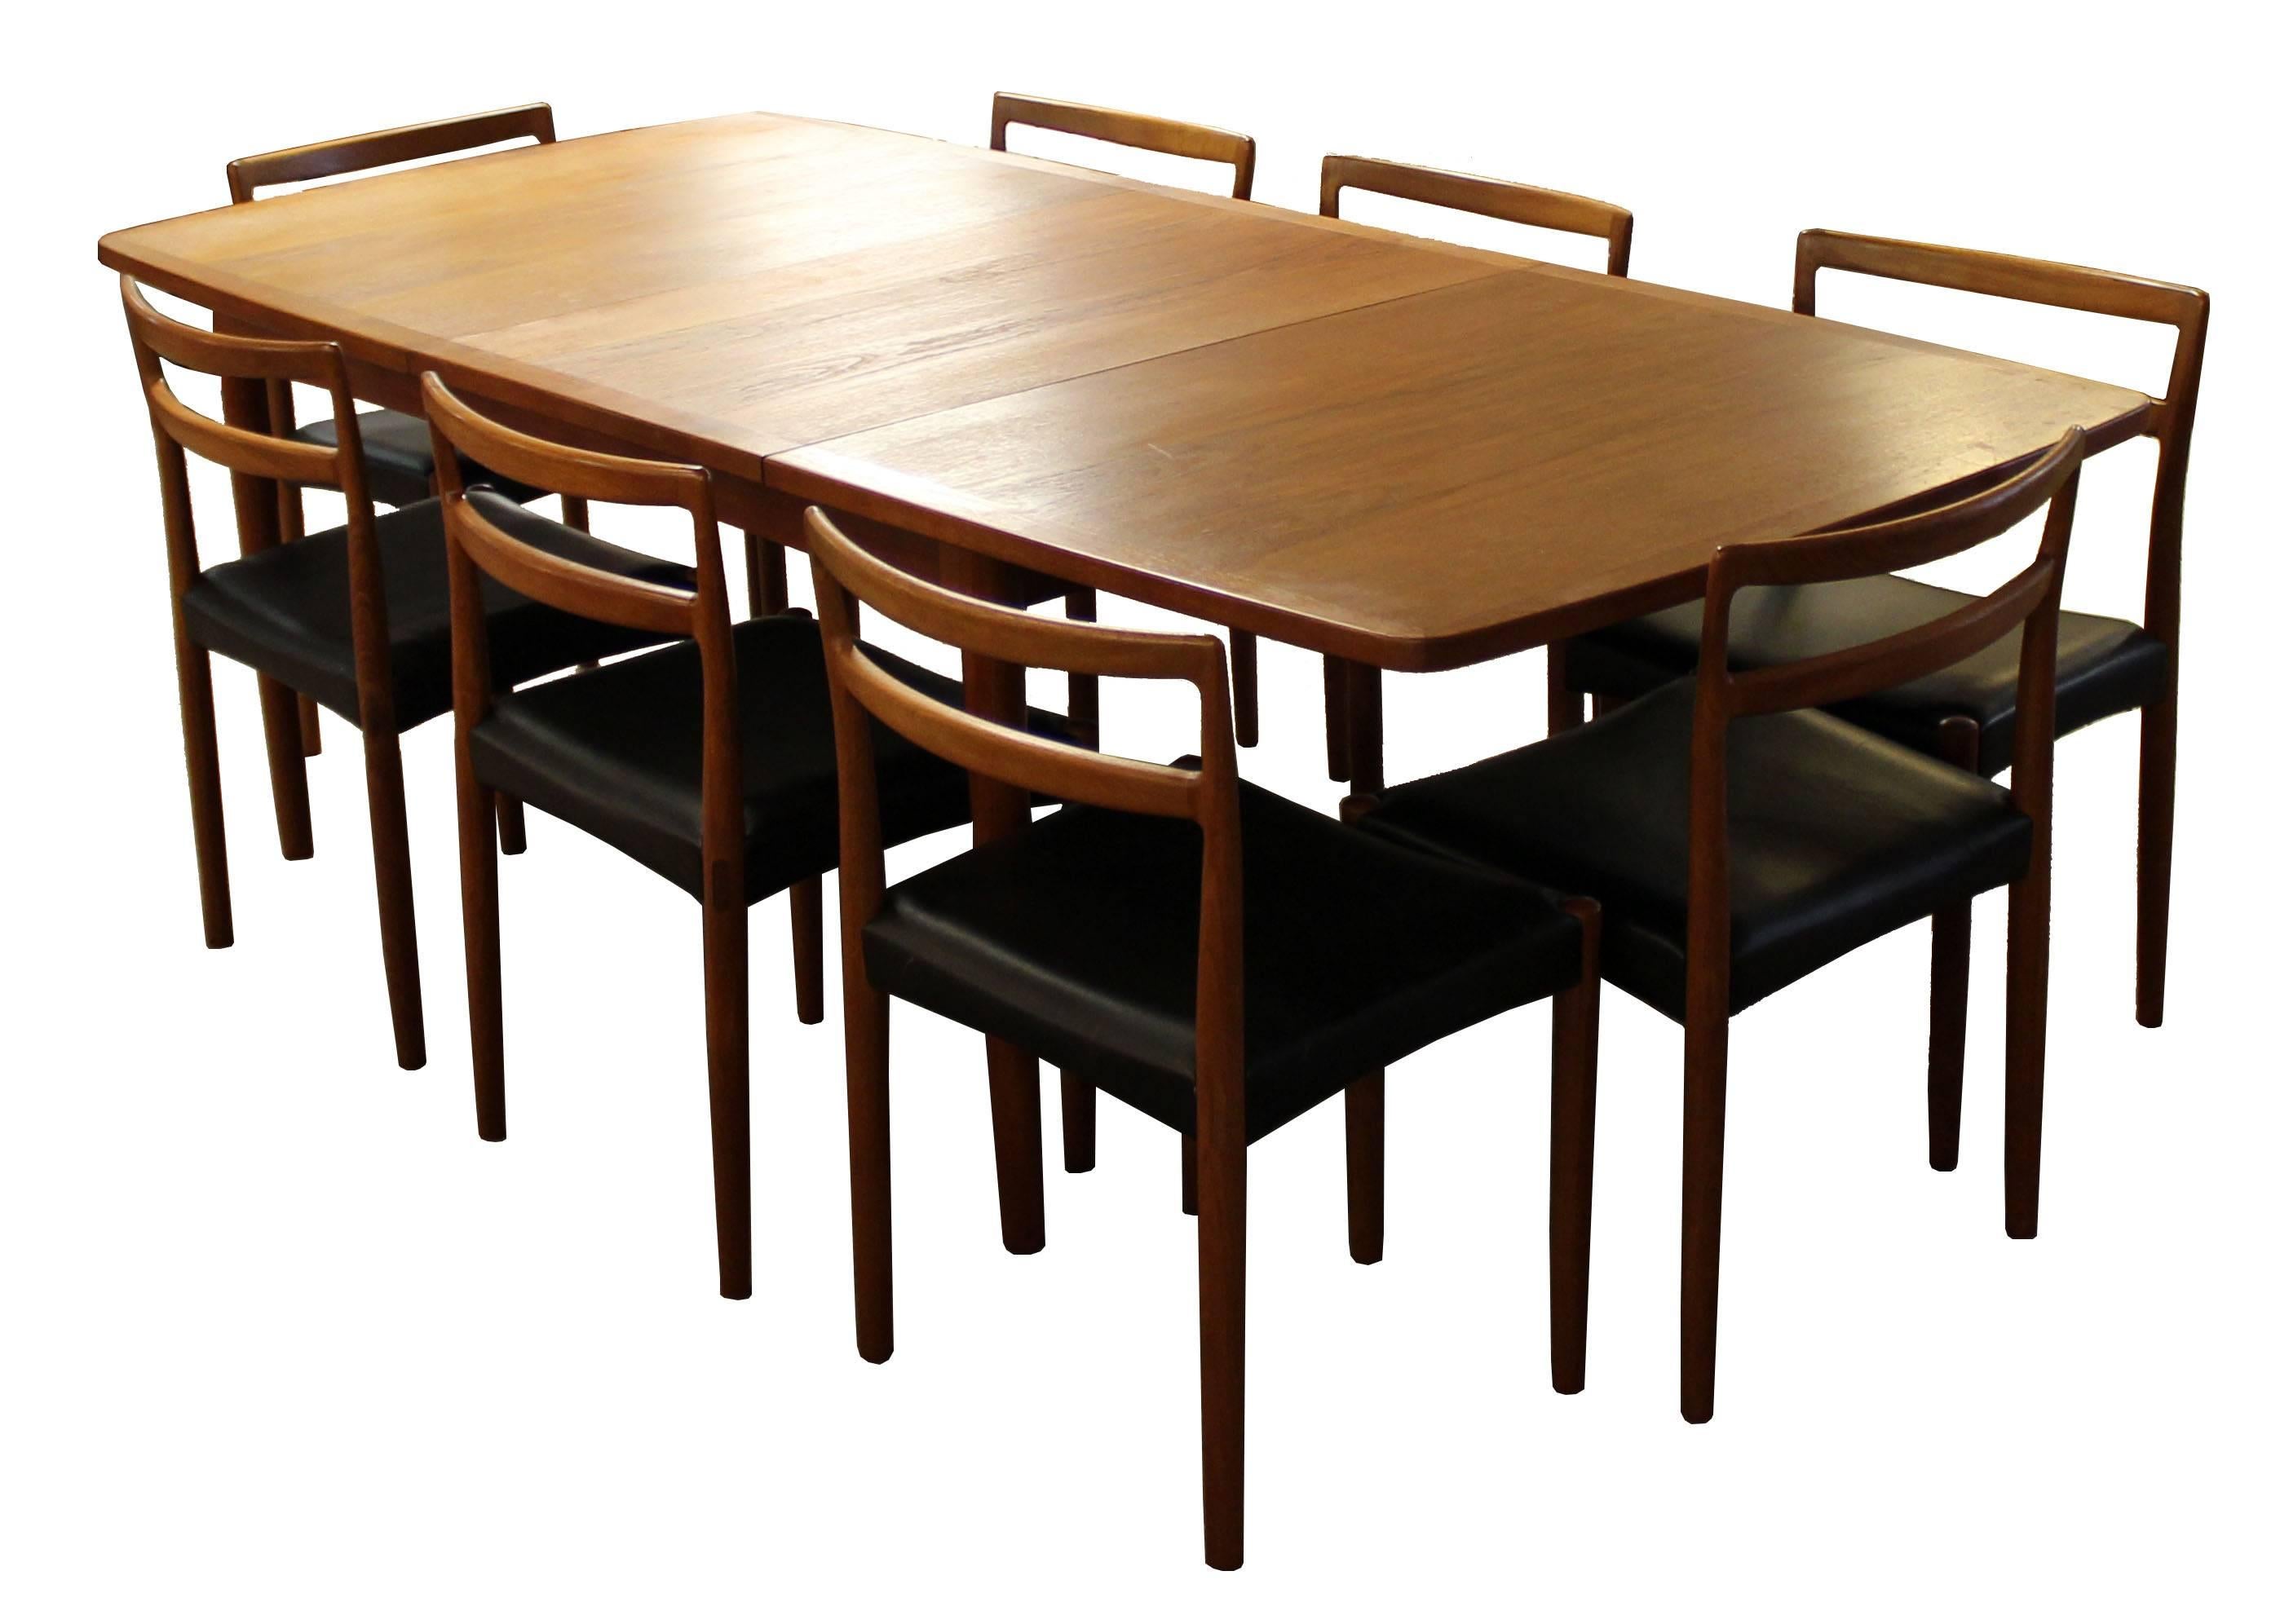 For your consideration is a phenomenal, teak, dining set, including an expandable table with two leafs and eight side, dining chairs, with black faux leather seats, by Norwegian company Illums Bolighus, circa the 1950s. In excellent condition. The